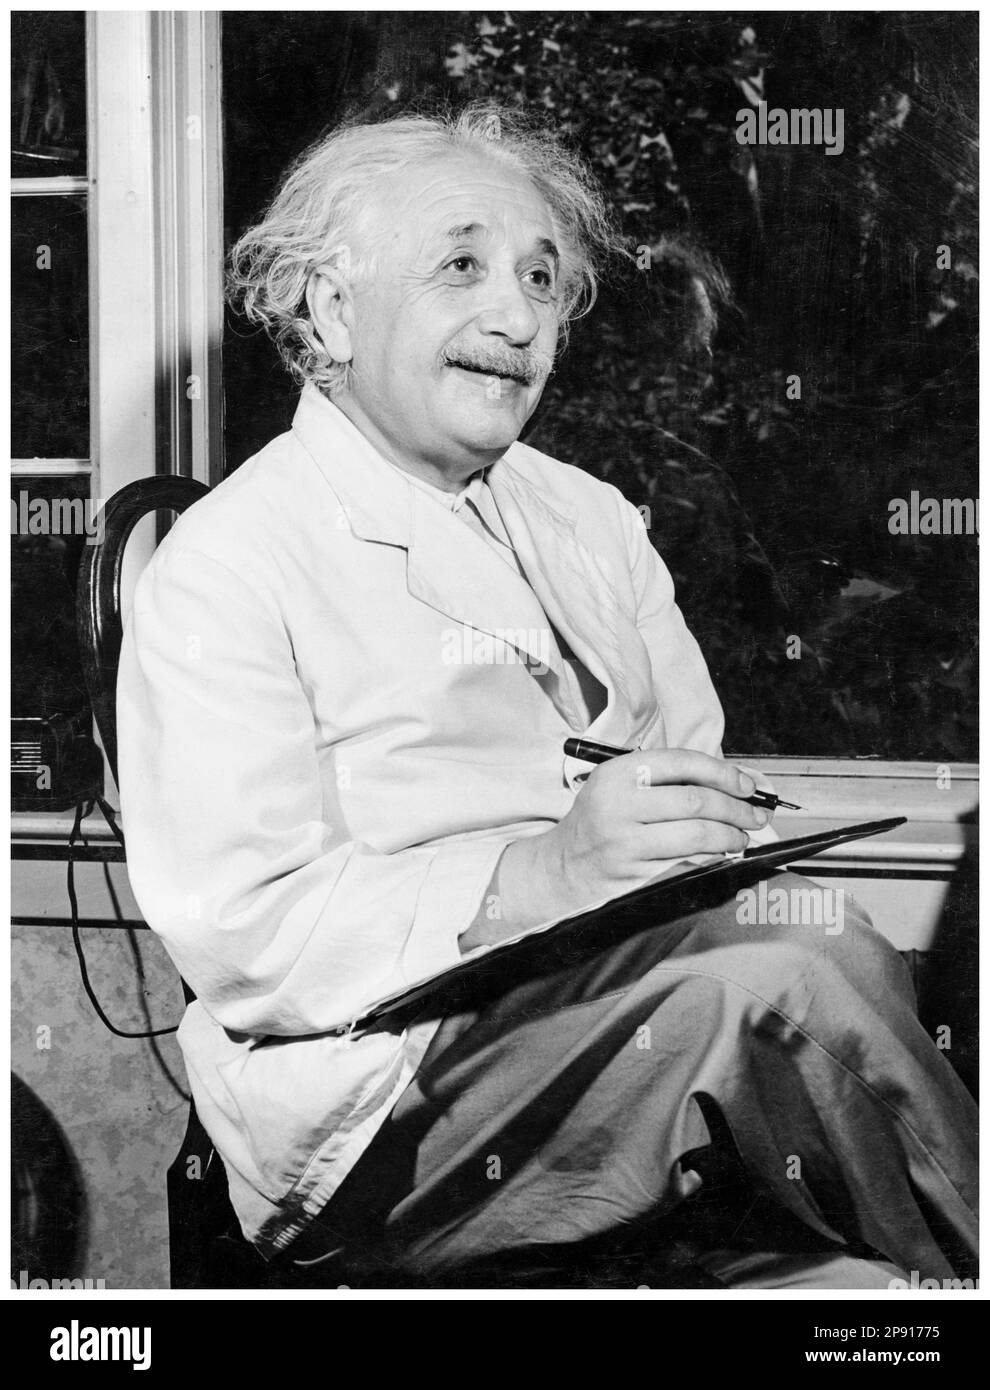 Albert Einstein (1879-1955), at Princeton NJ engaged in research work for the US Navy during WW2, portrait photograph, 1943 Stock Photo